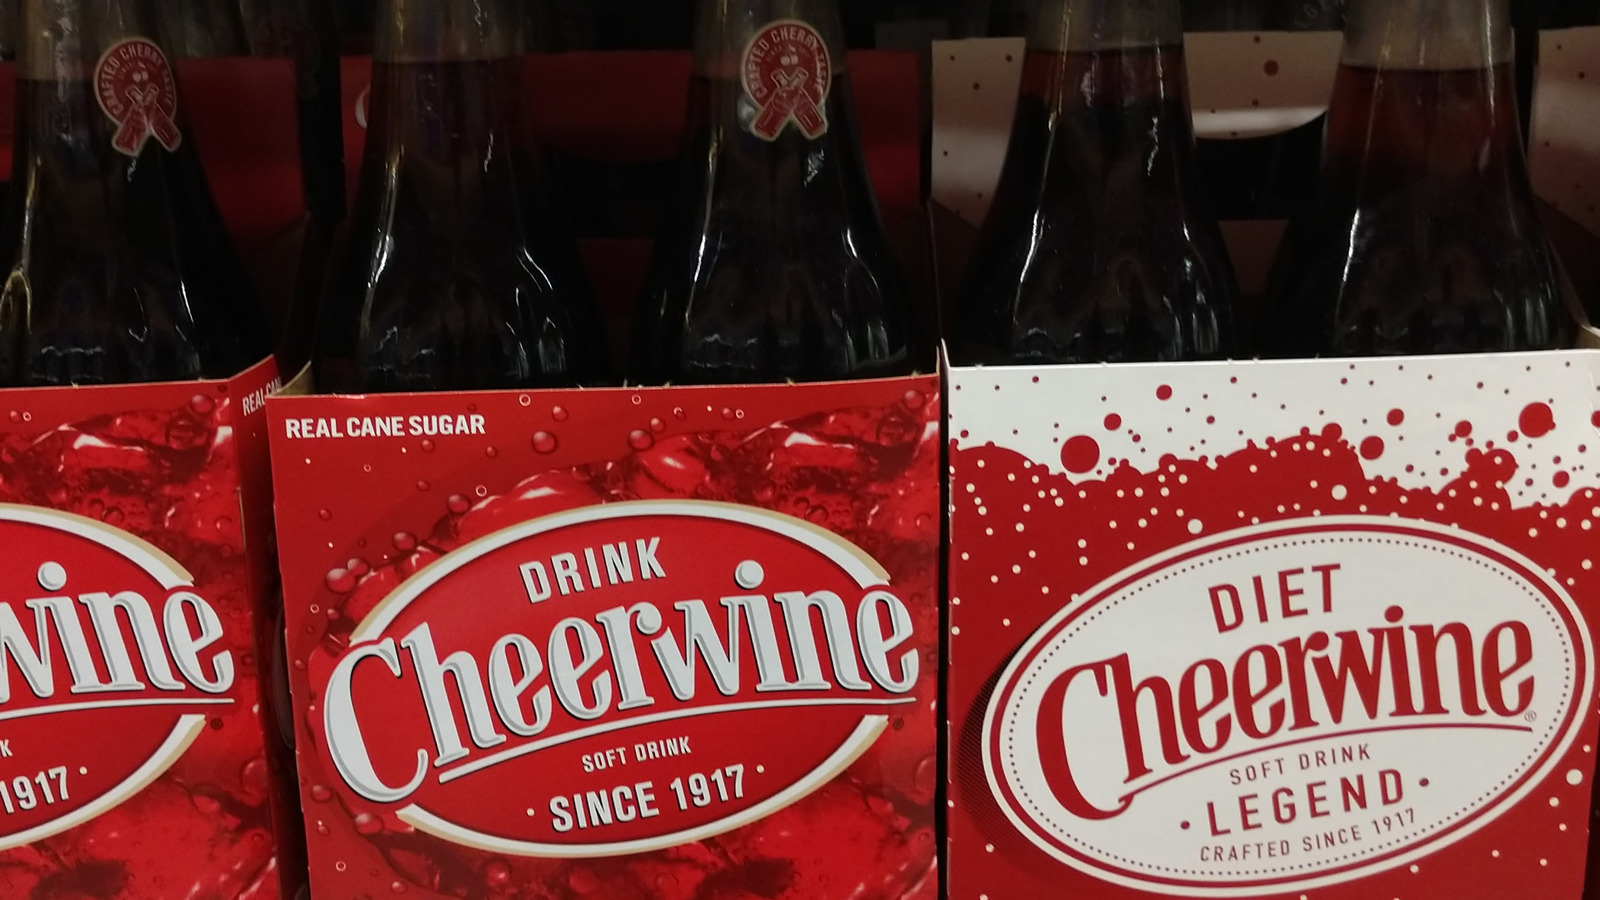 https://www.mashed.com/img/gallery/the-untold-truth-of-cheerwine/l-intro-1625081423.jpg